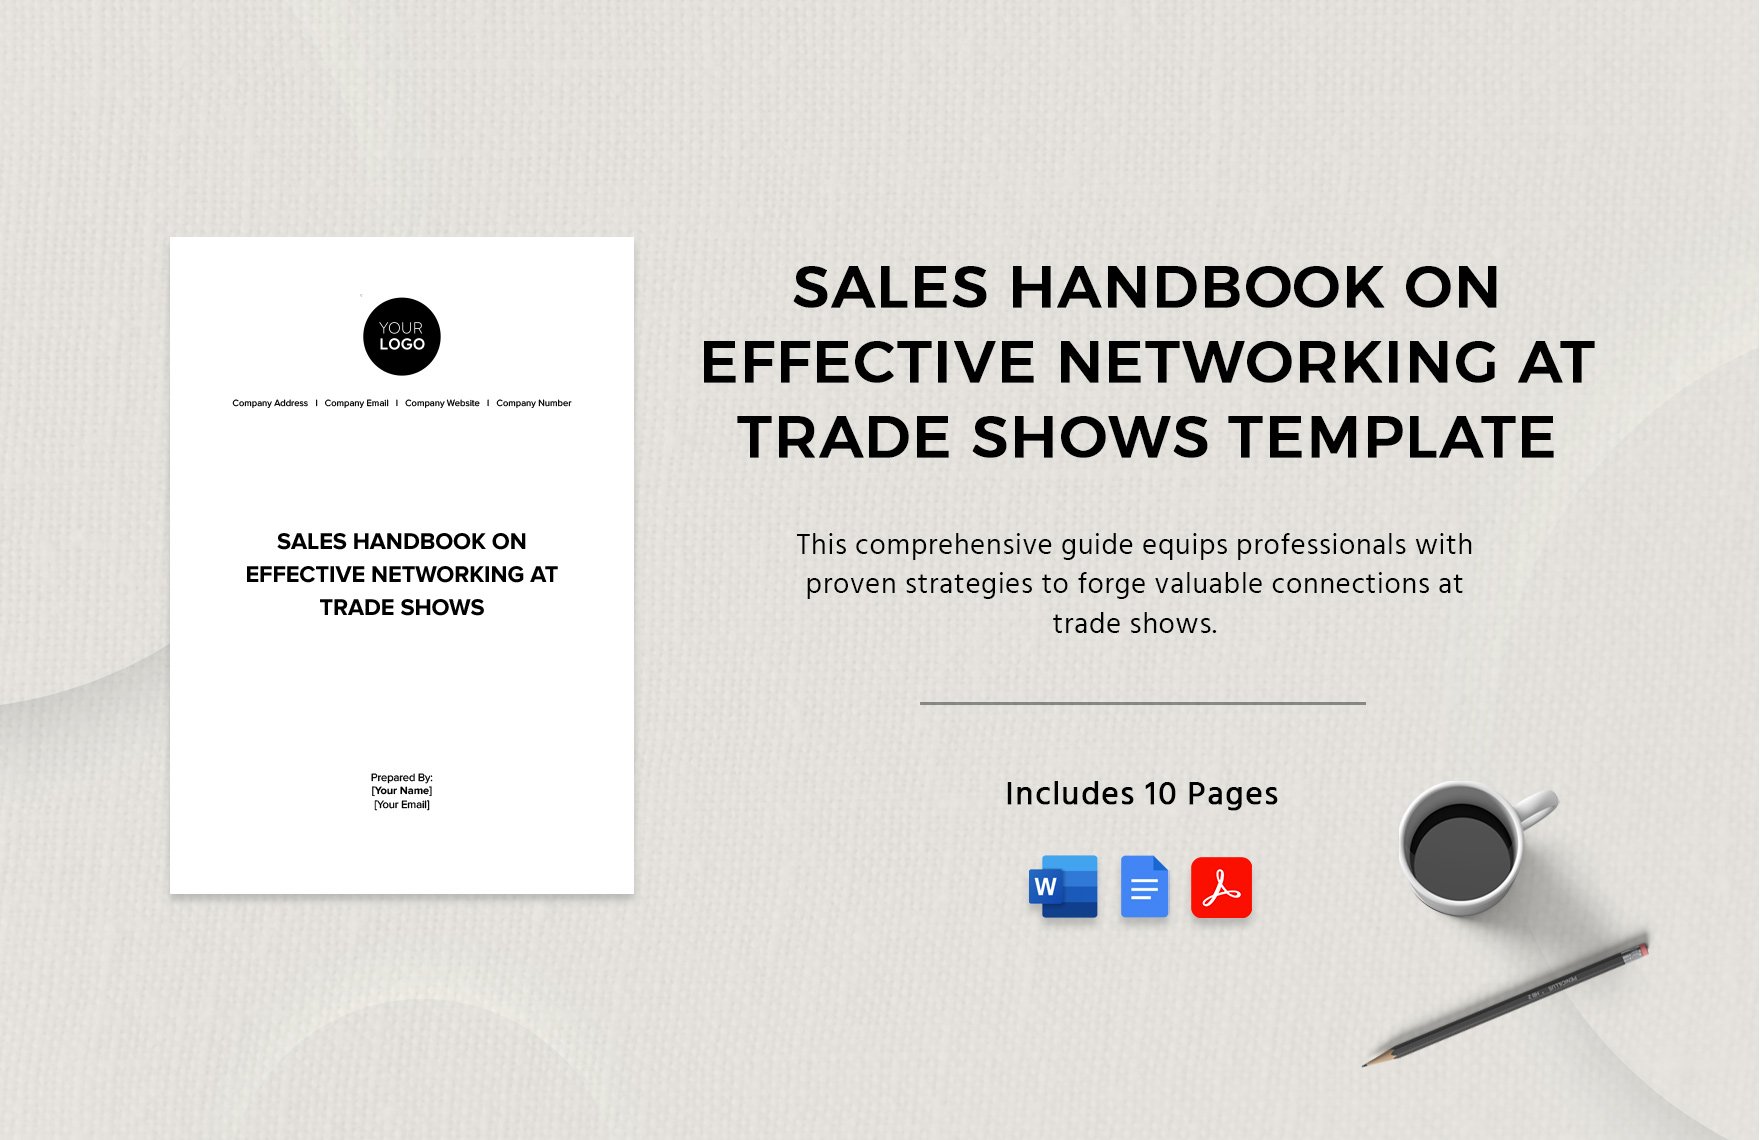 Sales Handbook on Effective Networking at Trade Shows Template in Word, Google Docs, PDF